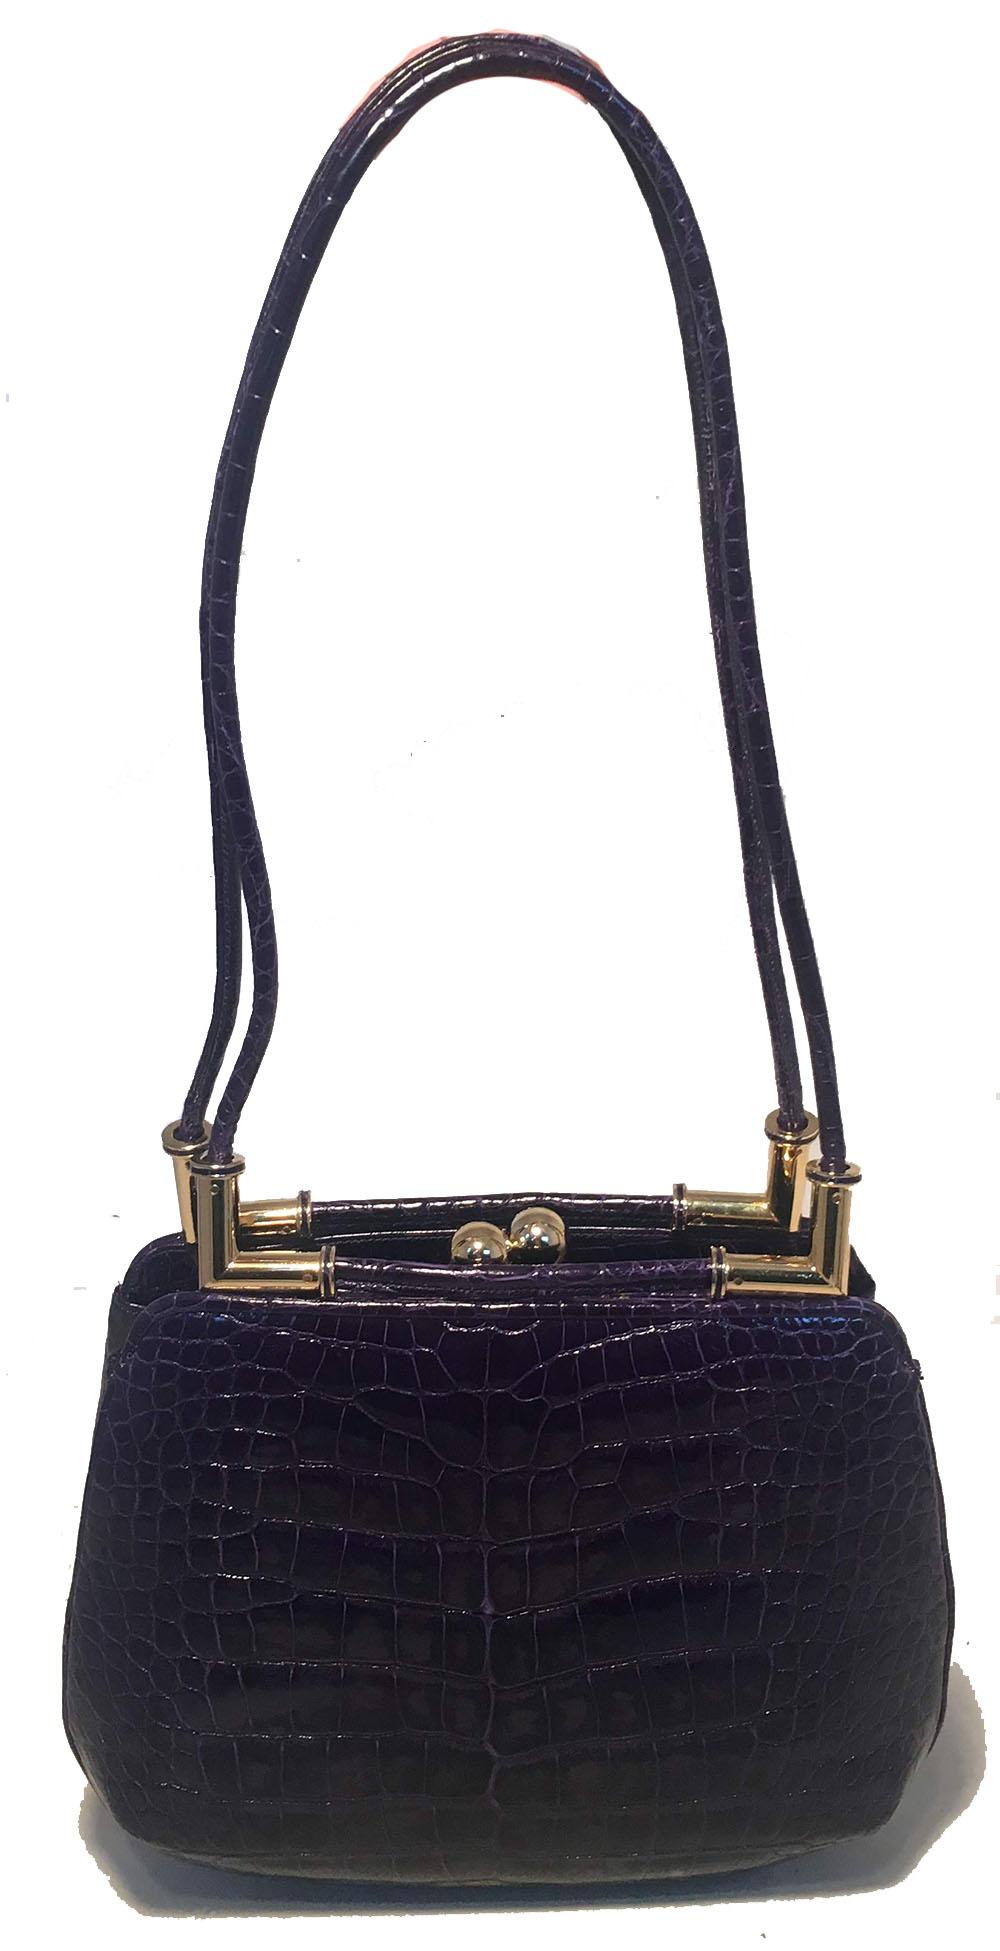 STUNNING Judith Leiber Dark Purple Alligator Shoulder Bag in excellent condition. Dark purple alligator exterior trimmed with gold hardware and double shoulder straps. 2 exterior side slit pockets. Top kiss lock closure opens to a purple leather